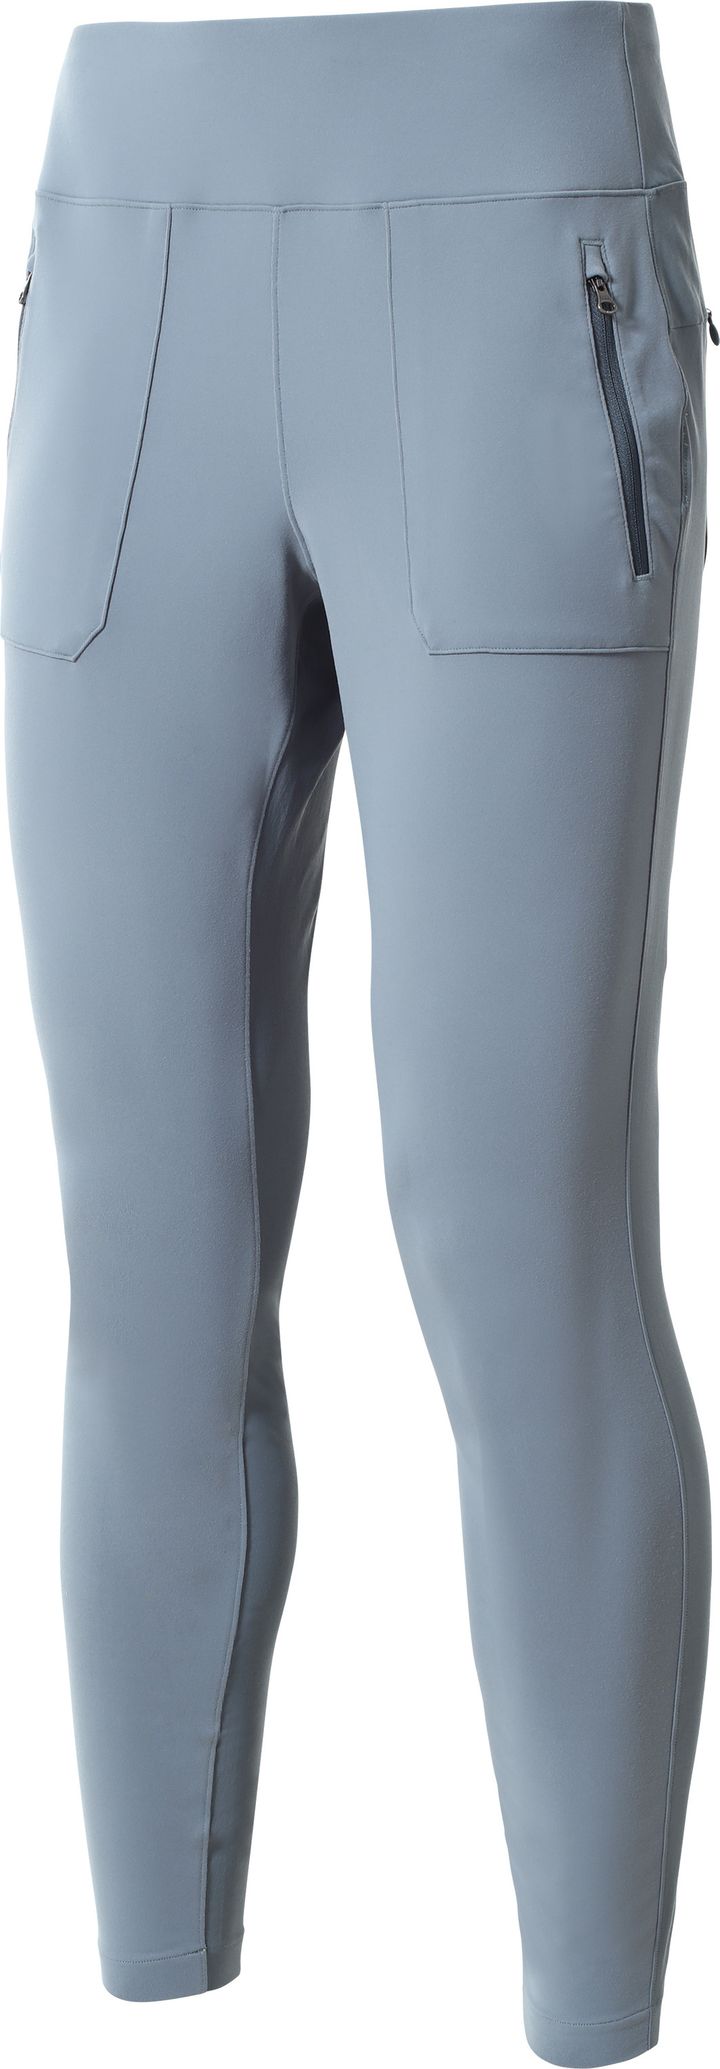 Women's Paramount Hybrid High Rise Tights Goblin Blue The North Face